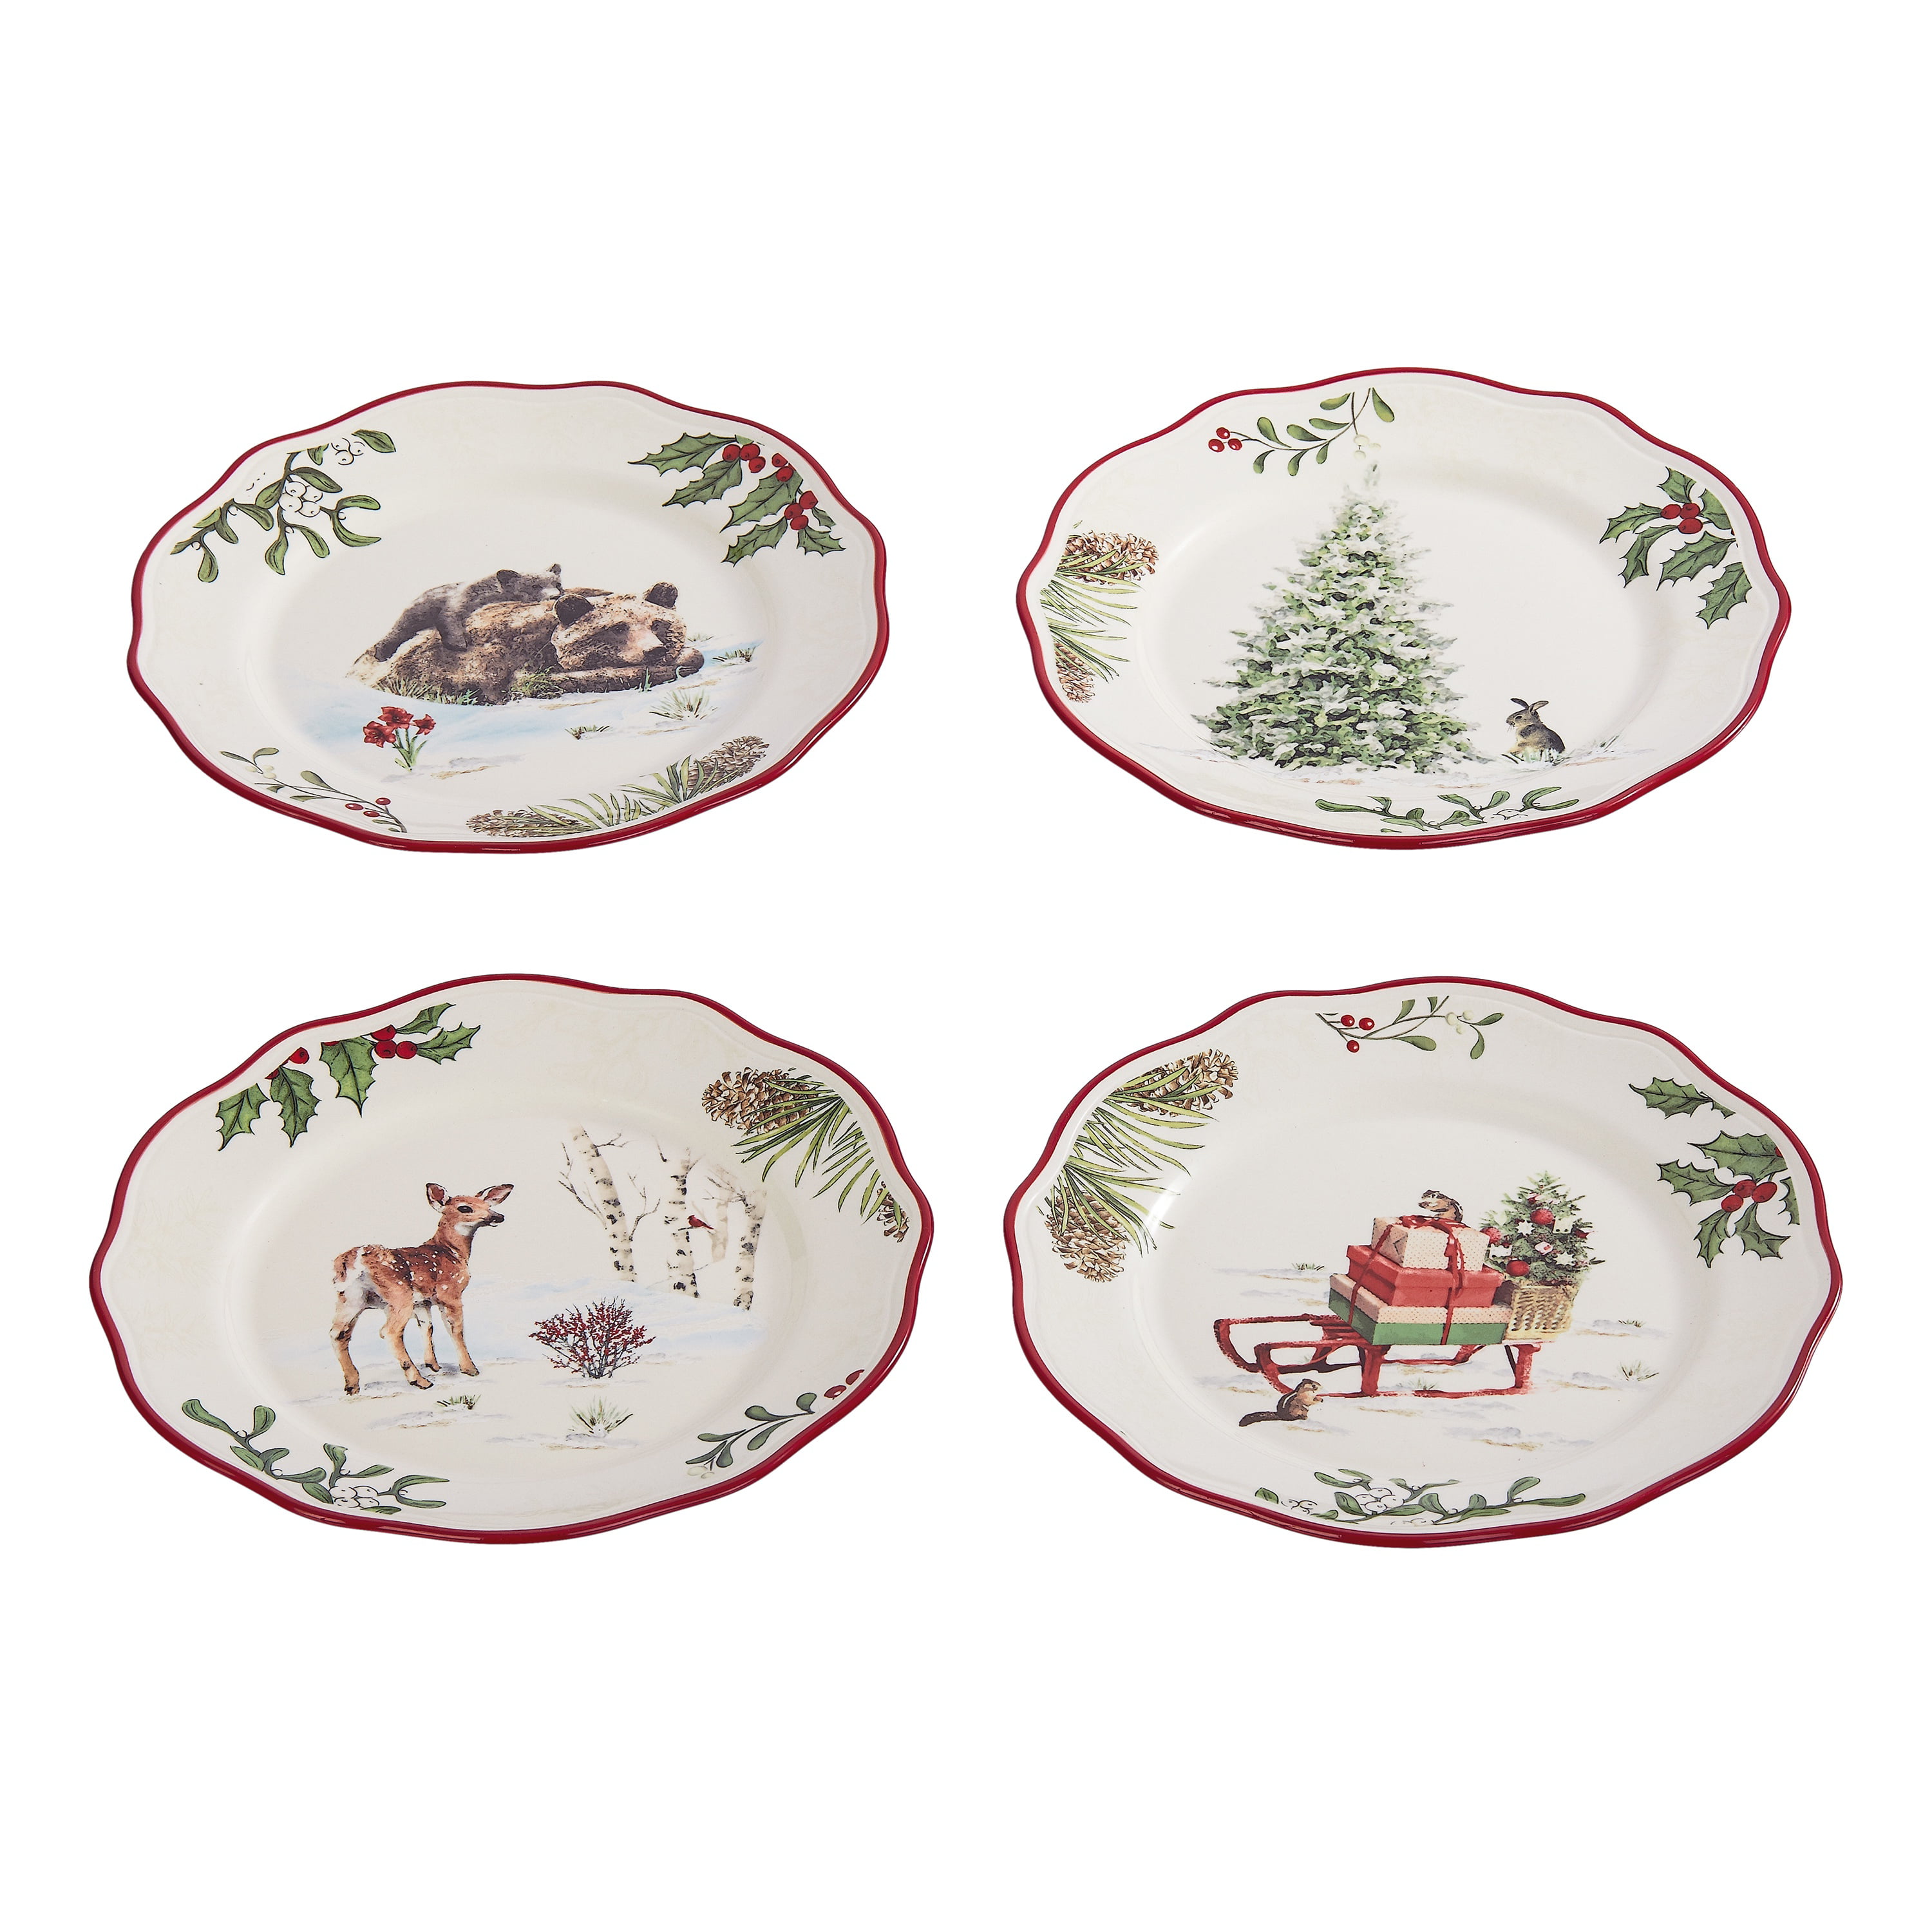 Details about   BETTER HOMES & GARDENS HERITAGE SET OF 4 CHRISTMAS HOLIDAY  7" BOWLS 